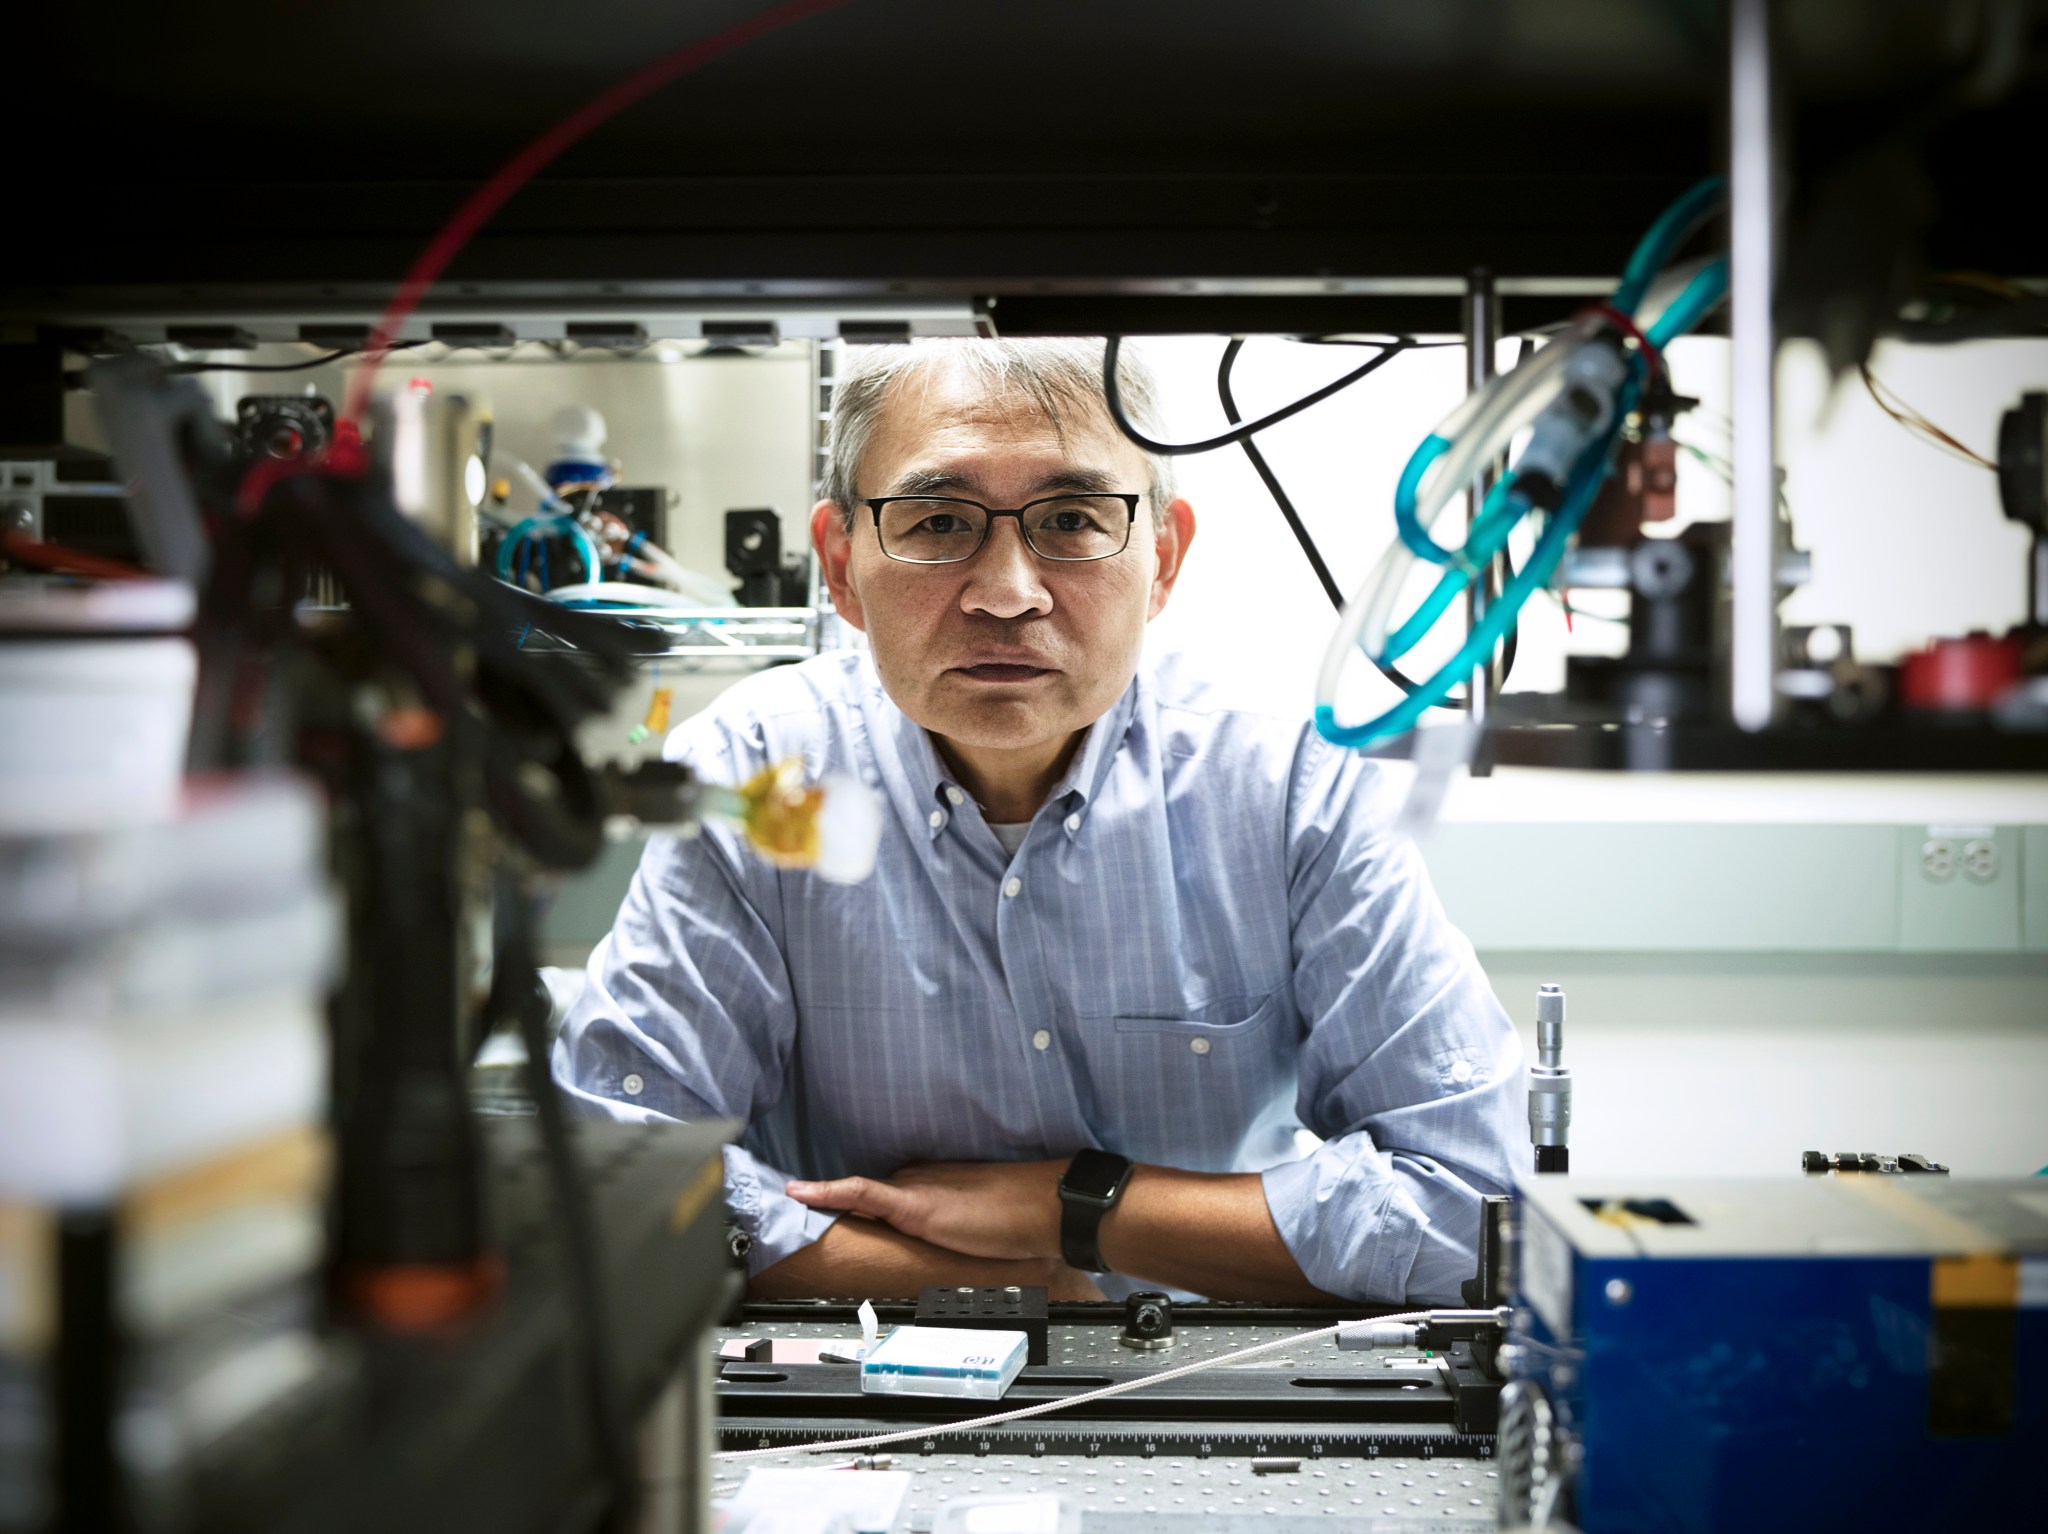 Goddard technologist Tony Yu, man with gray hair and tan skin, wearing glasses and a blue dress shirt sits and looks through a gap in wires and cords at his desk.